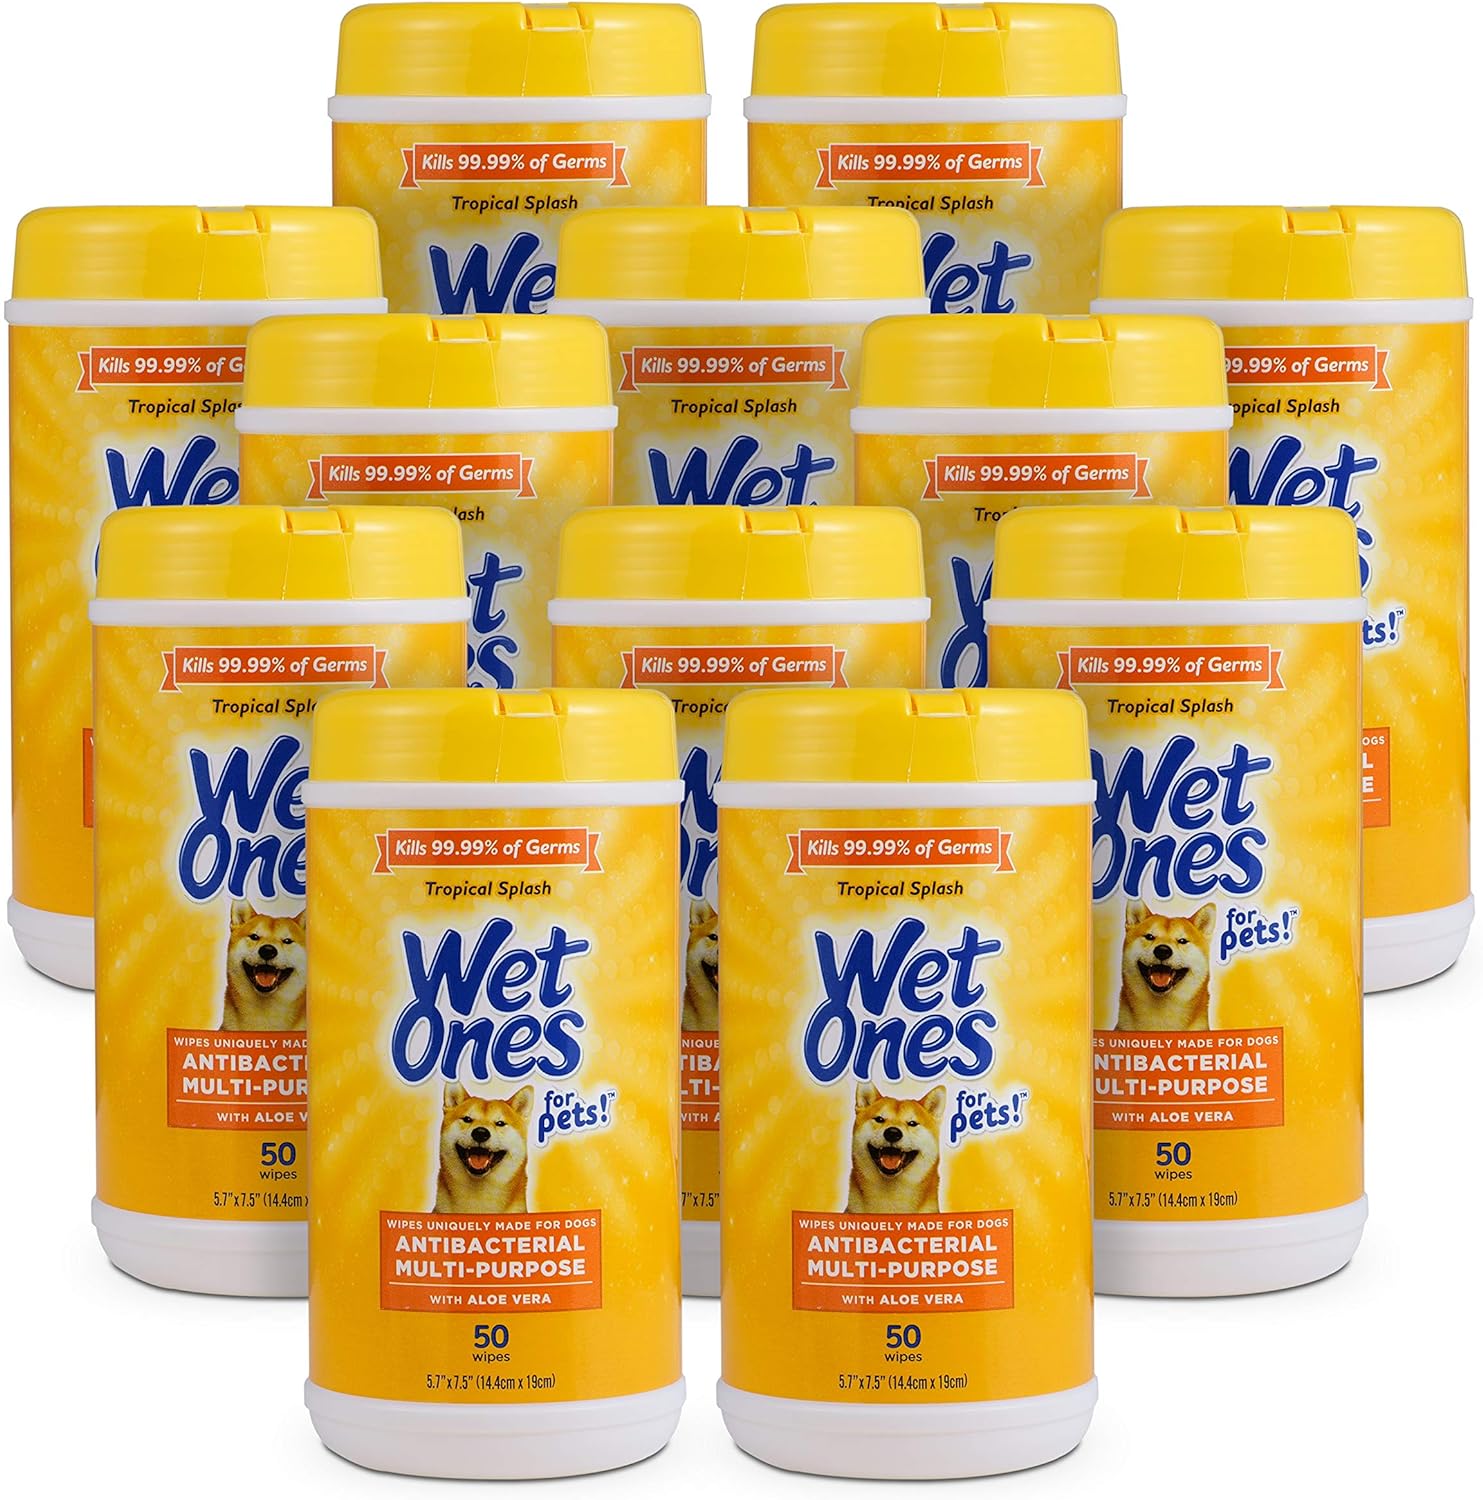 Wet Ones for Pets Multi-Purpose Dog Wipes with Aloe Vera, 50 Count - 12 Pack | Dog Wipes for All Dogs in Tropical Splash, Wipes for Paws & All Purpose